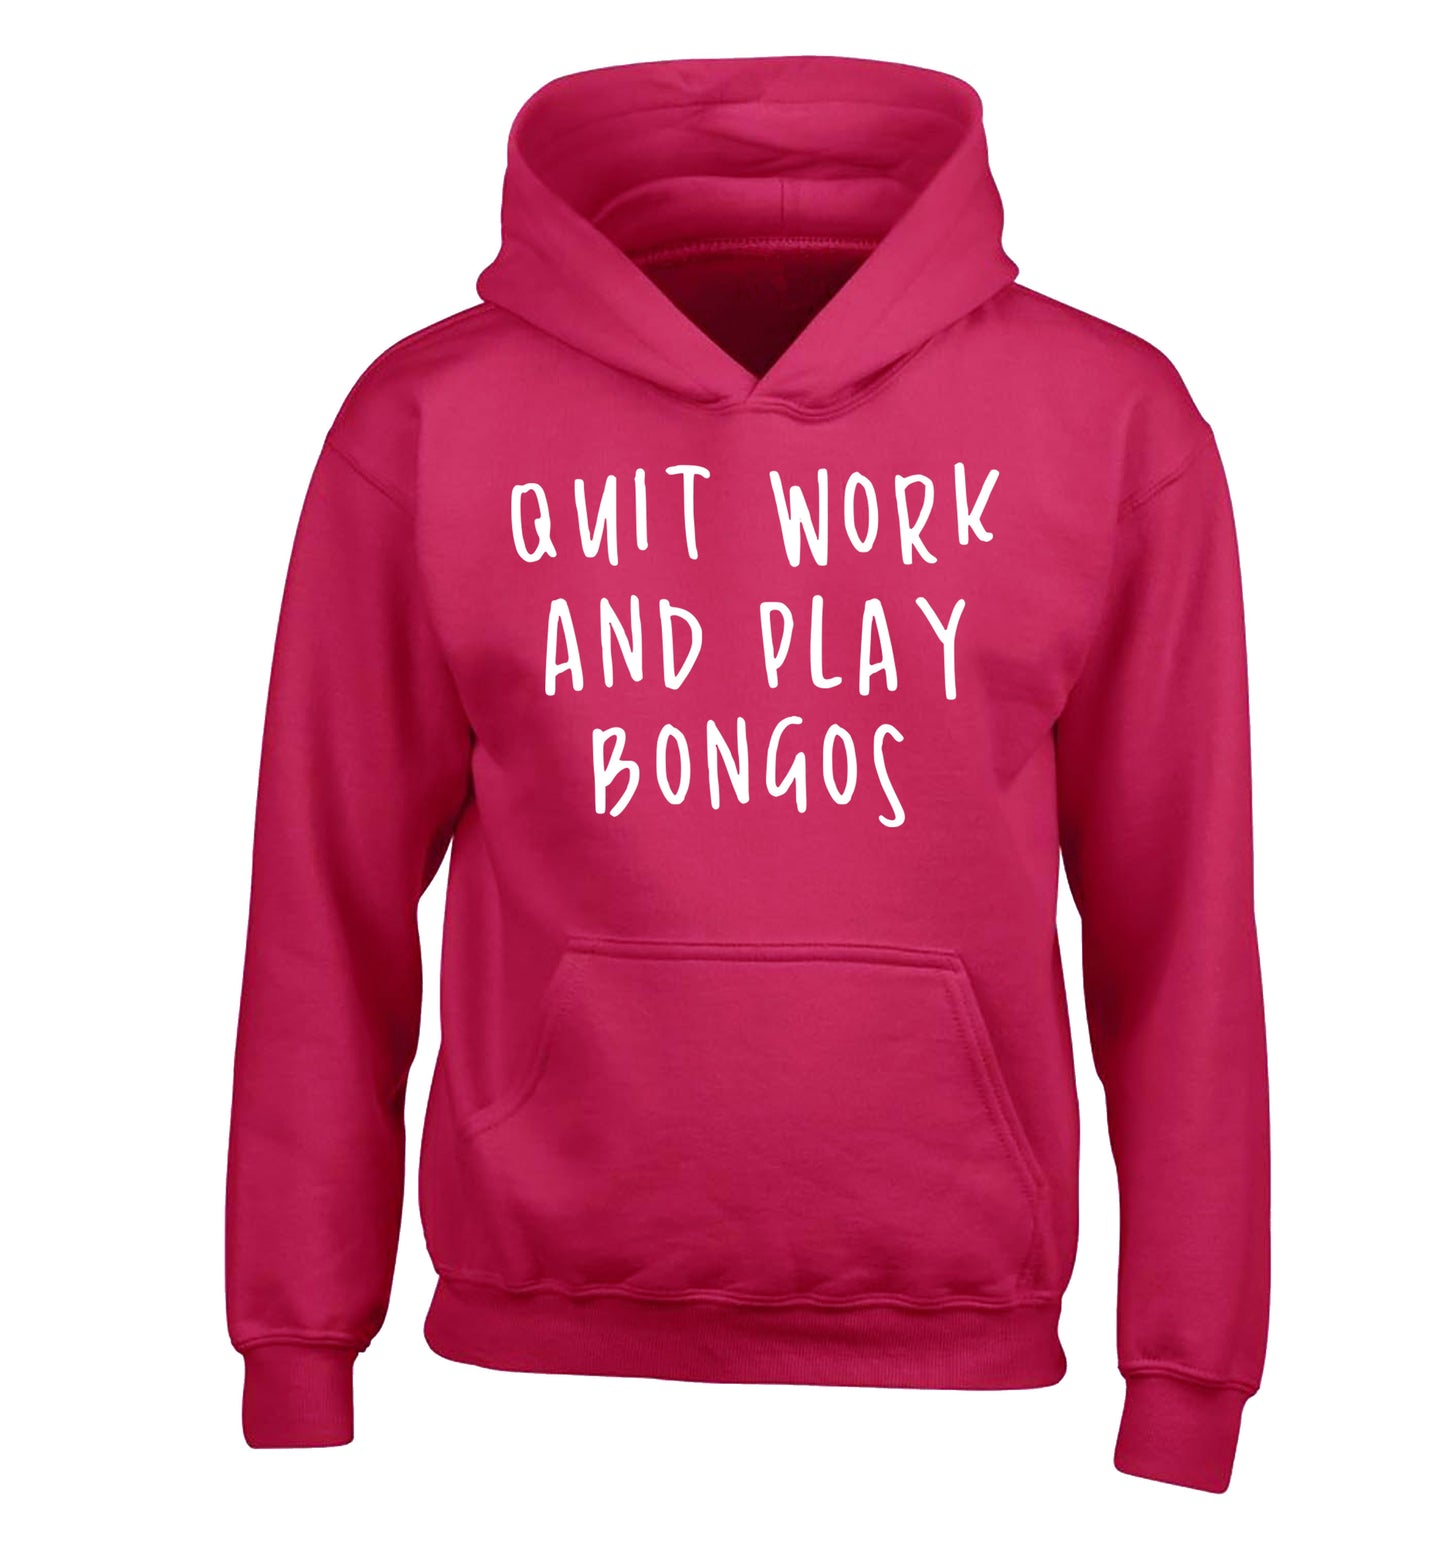 Quit work and play bongos children's pink hoodie 12-14 Years